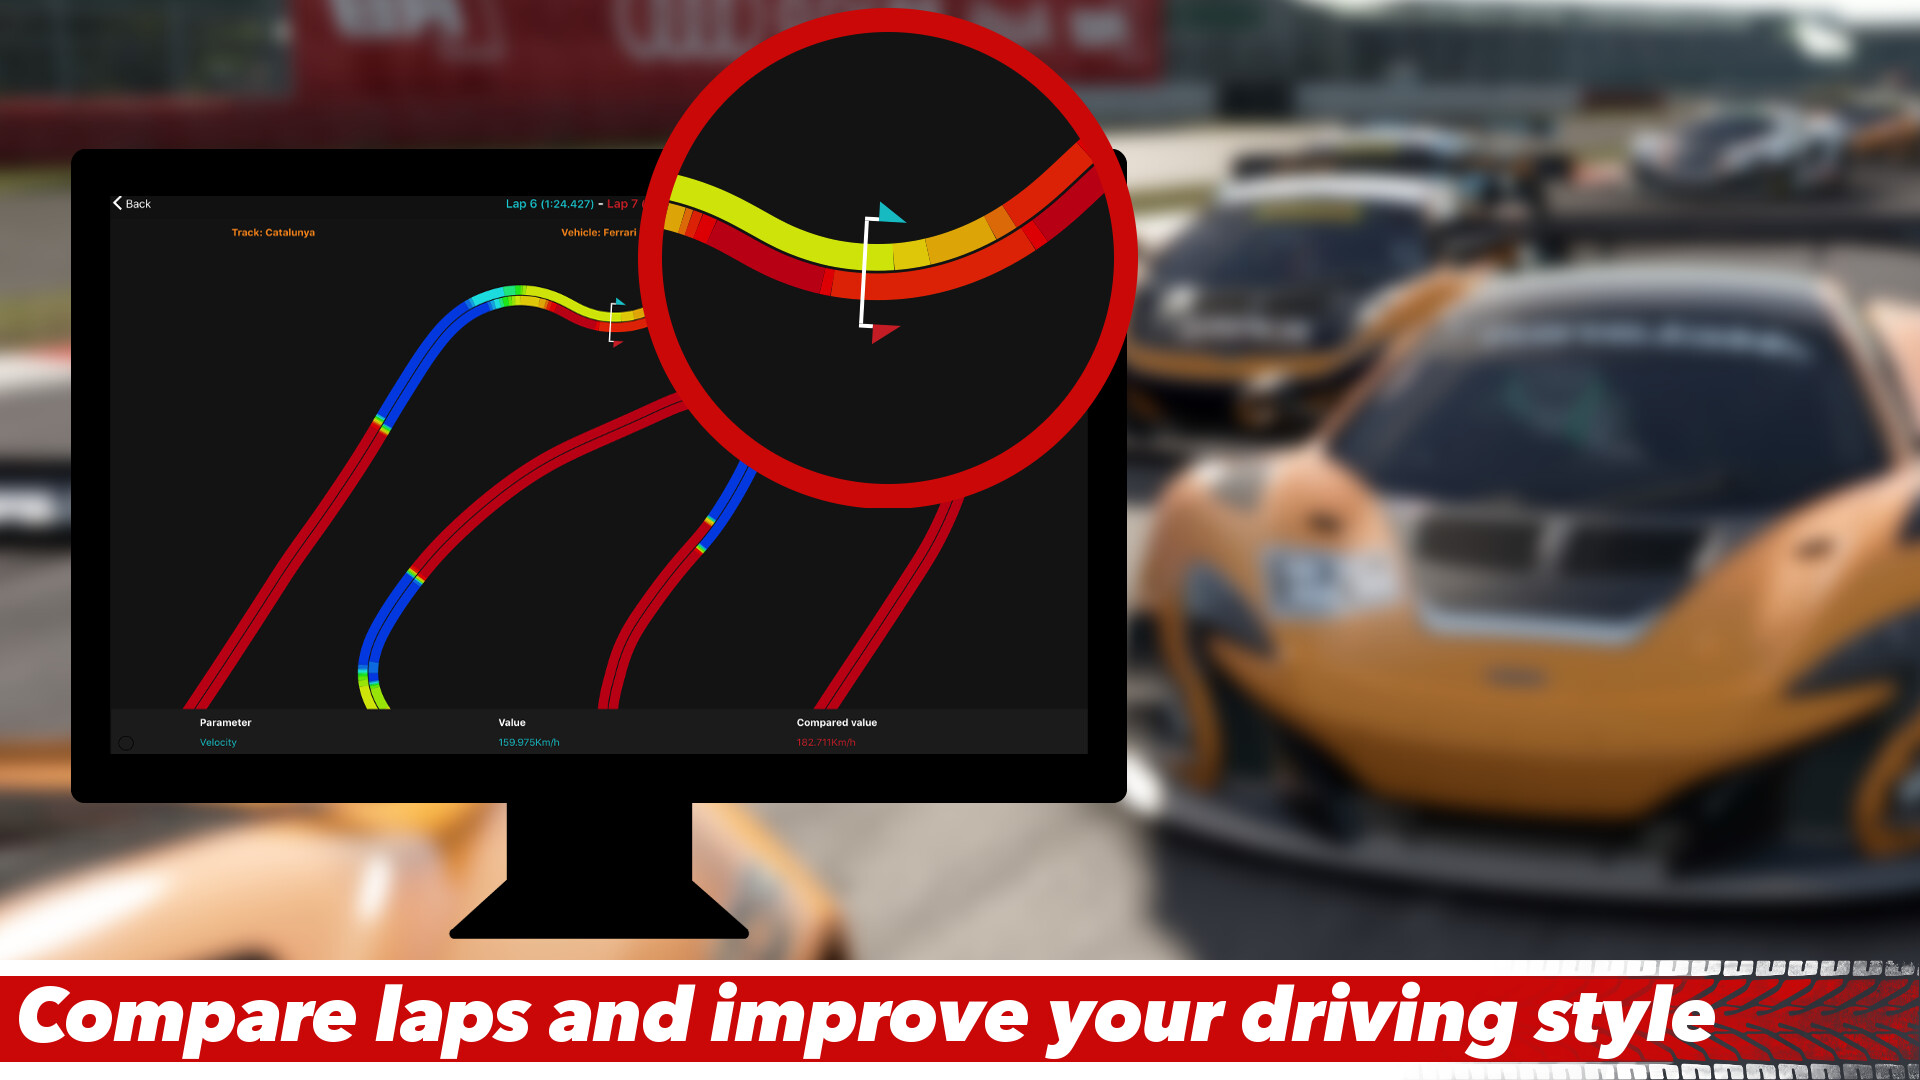 Steam Community :: Guide :: [How To] Run Assetto Corsa on a dual-monitor  setup